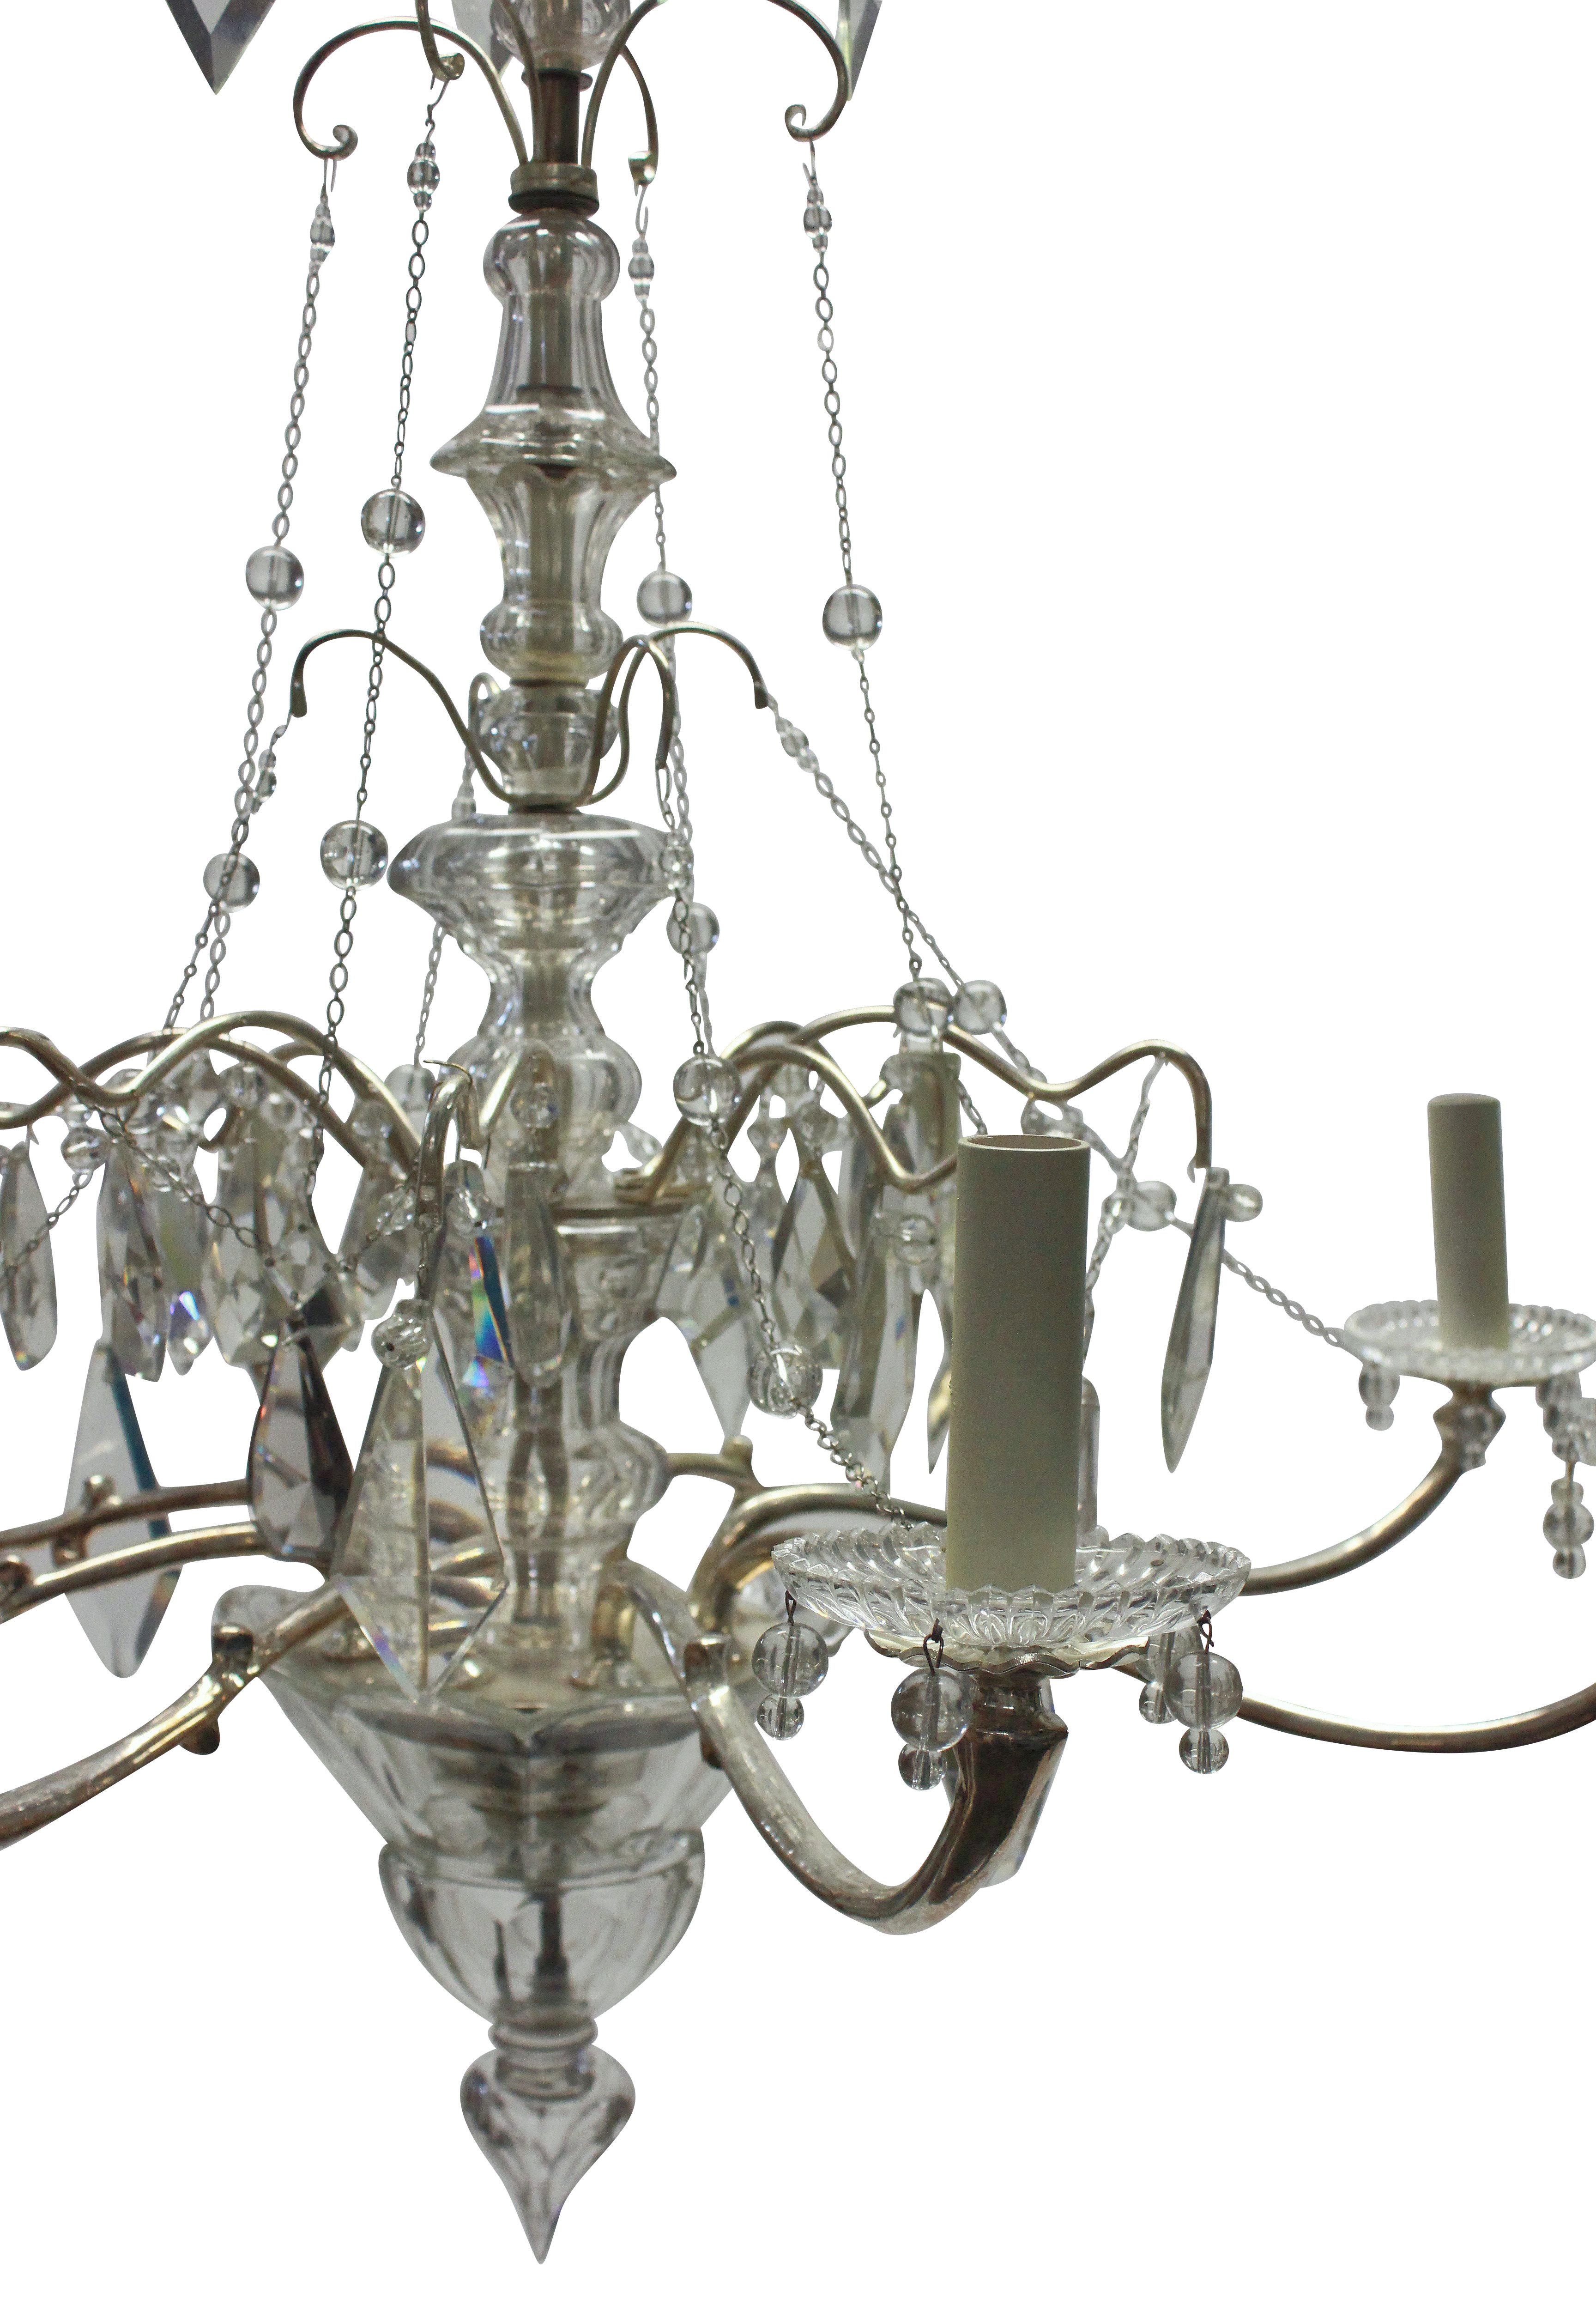 Mid-20th Century Decorative Silver & Cut Glass Chandelier For Sale